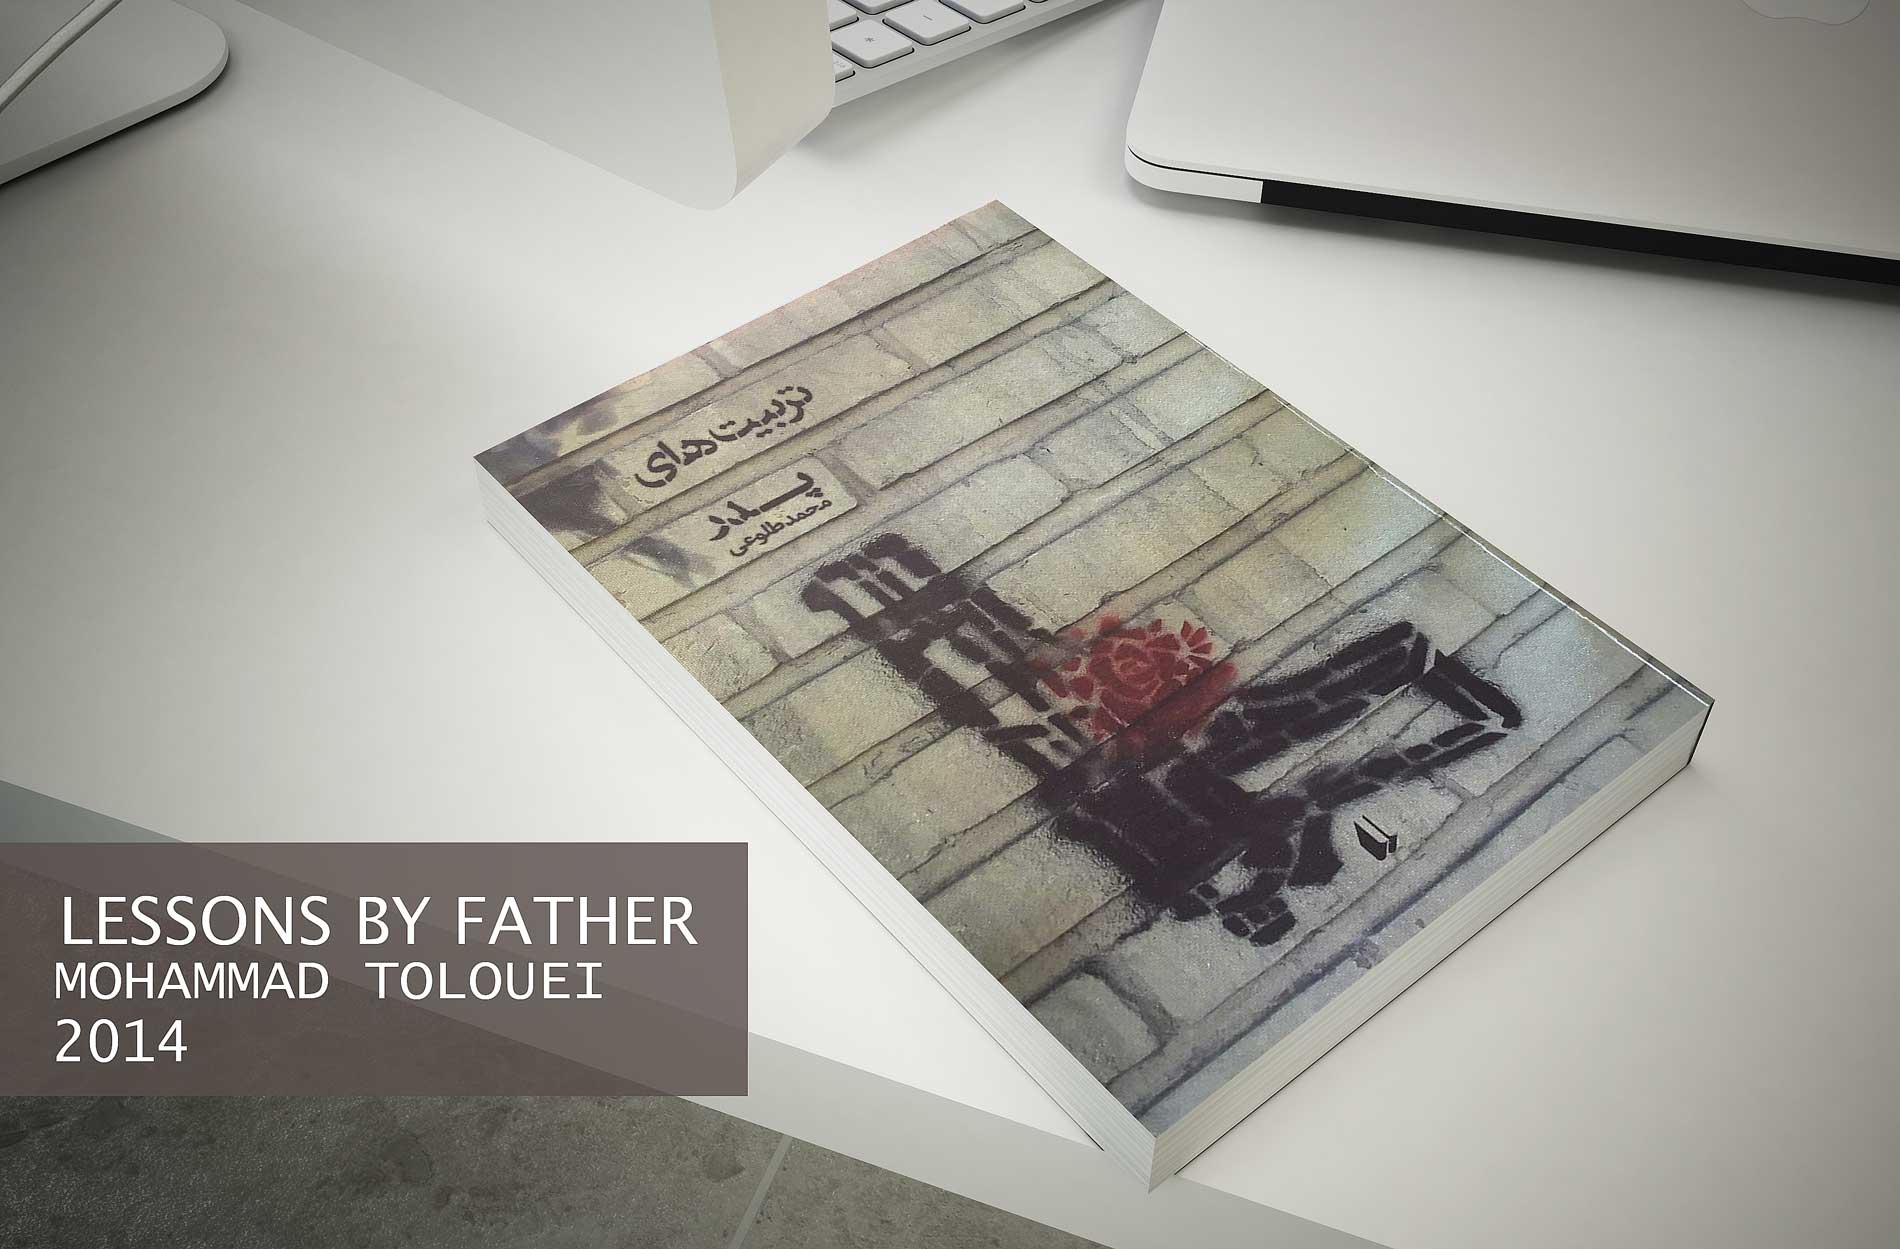 Lessons by Father - Lessons by Father